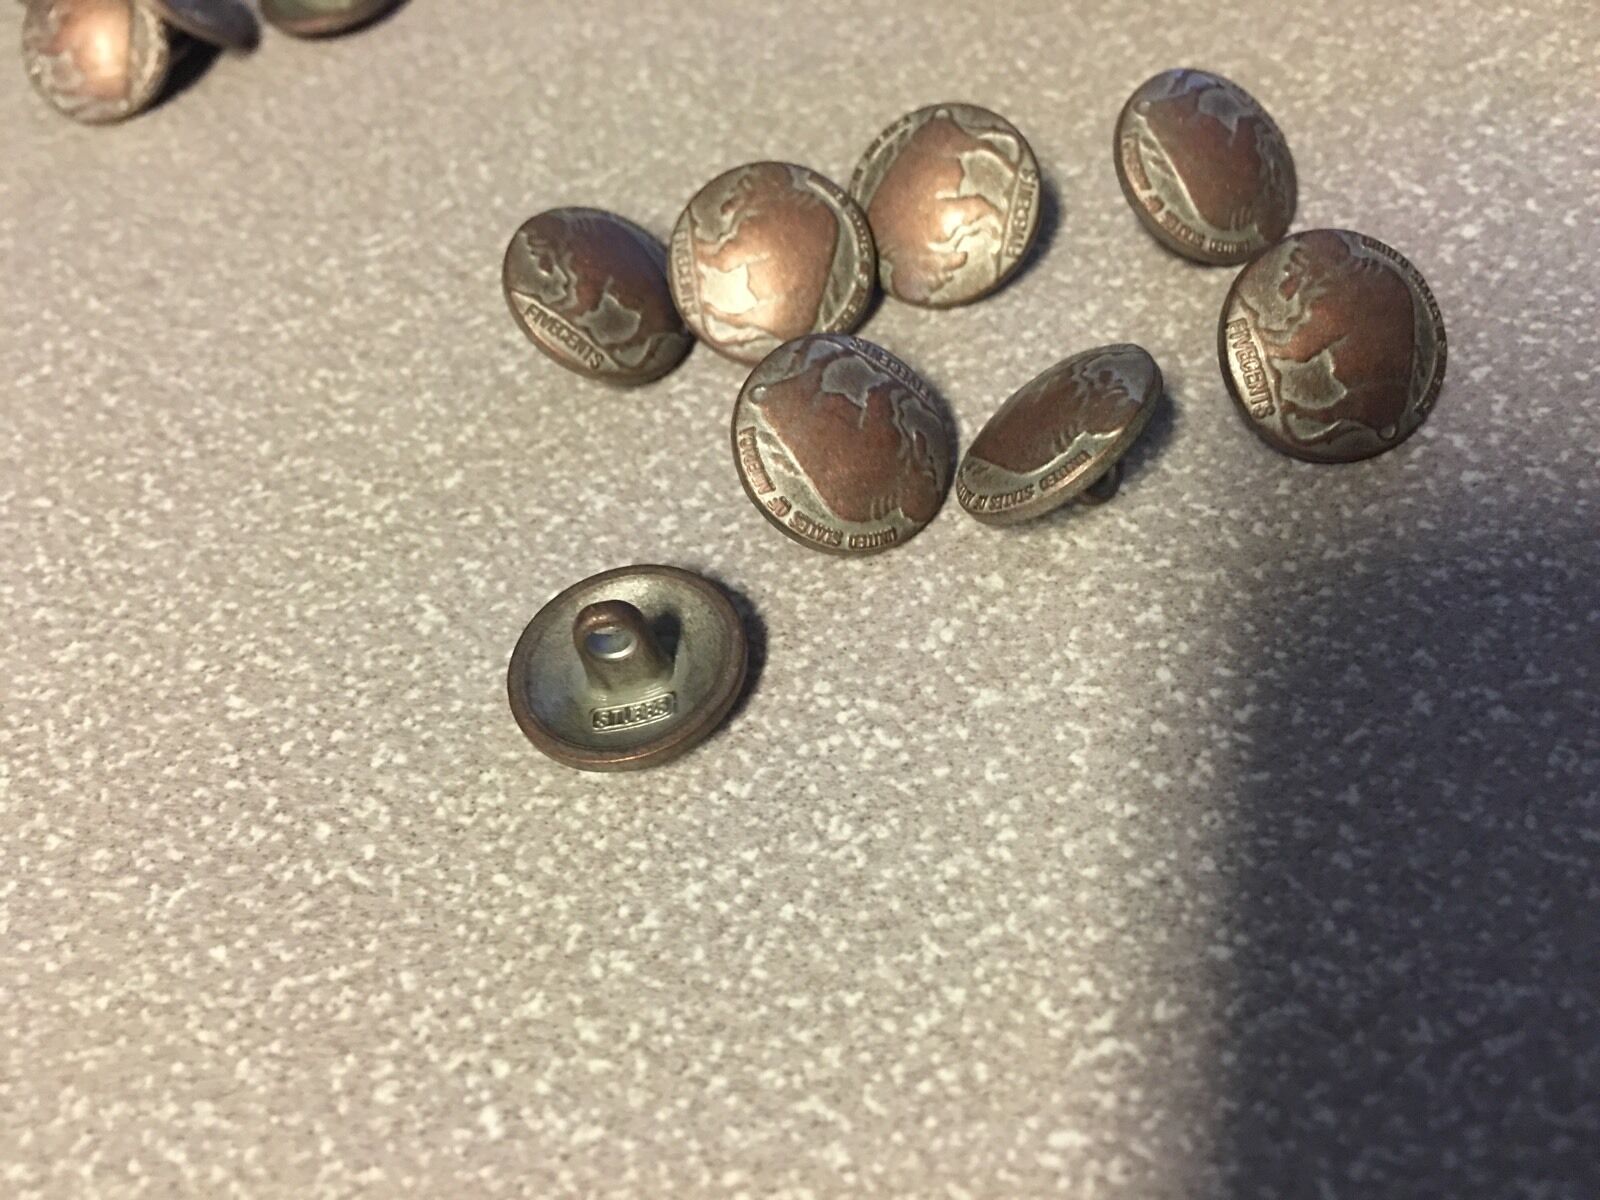 8 PACK Buffalo Nickel Metal Red Copper BUTTONS 9/16" NEW VINTAGE REPLICA CRAFTS Без бренда - фотография #2